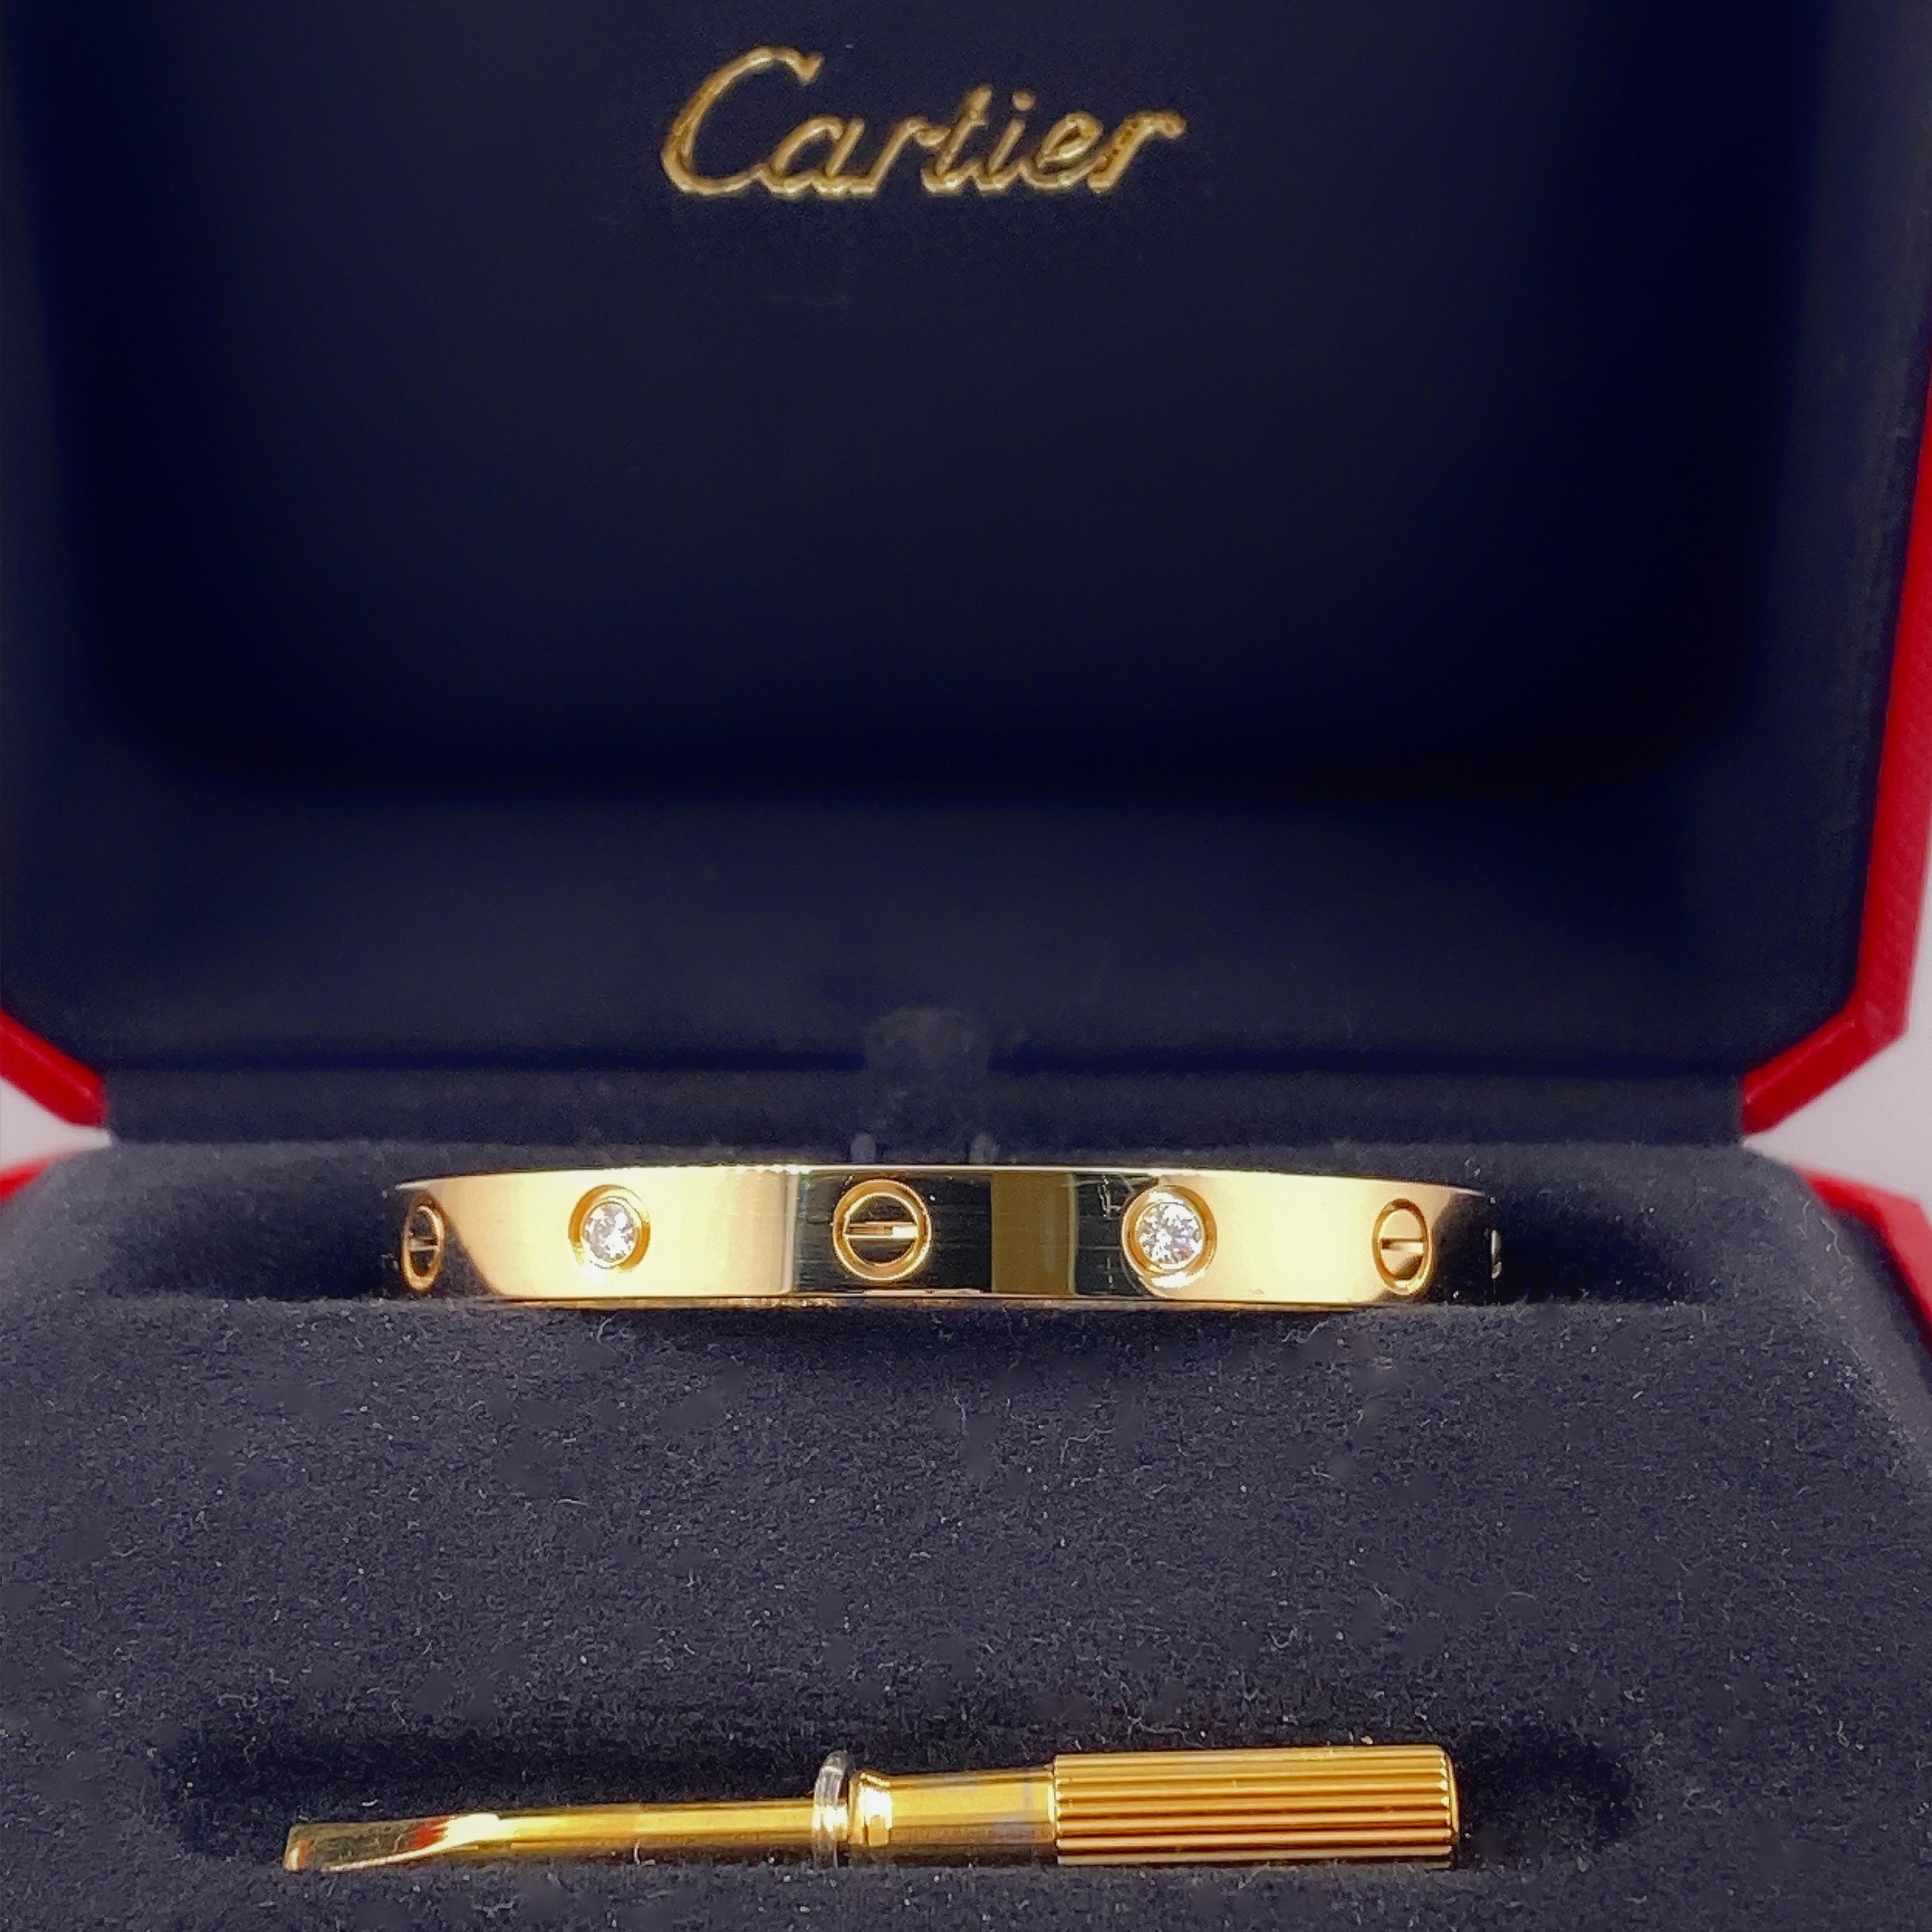 Cartier 4 Diamond Love Bangle Bracelet with Box 18kt Yellow Gold SZ 16 In Excellent Condition For Sale In San Diego, CA